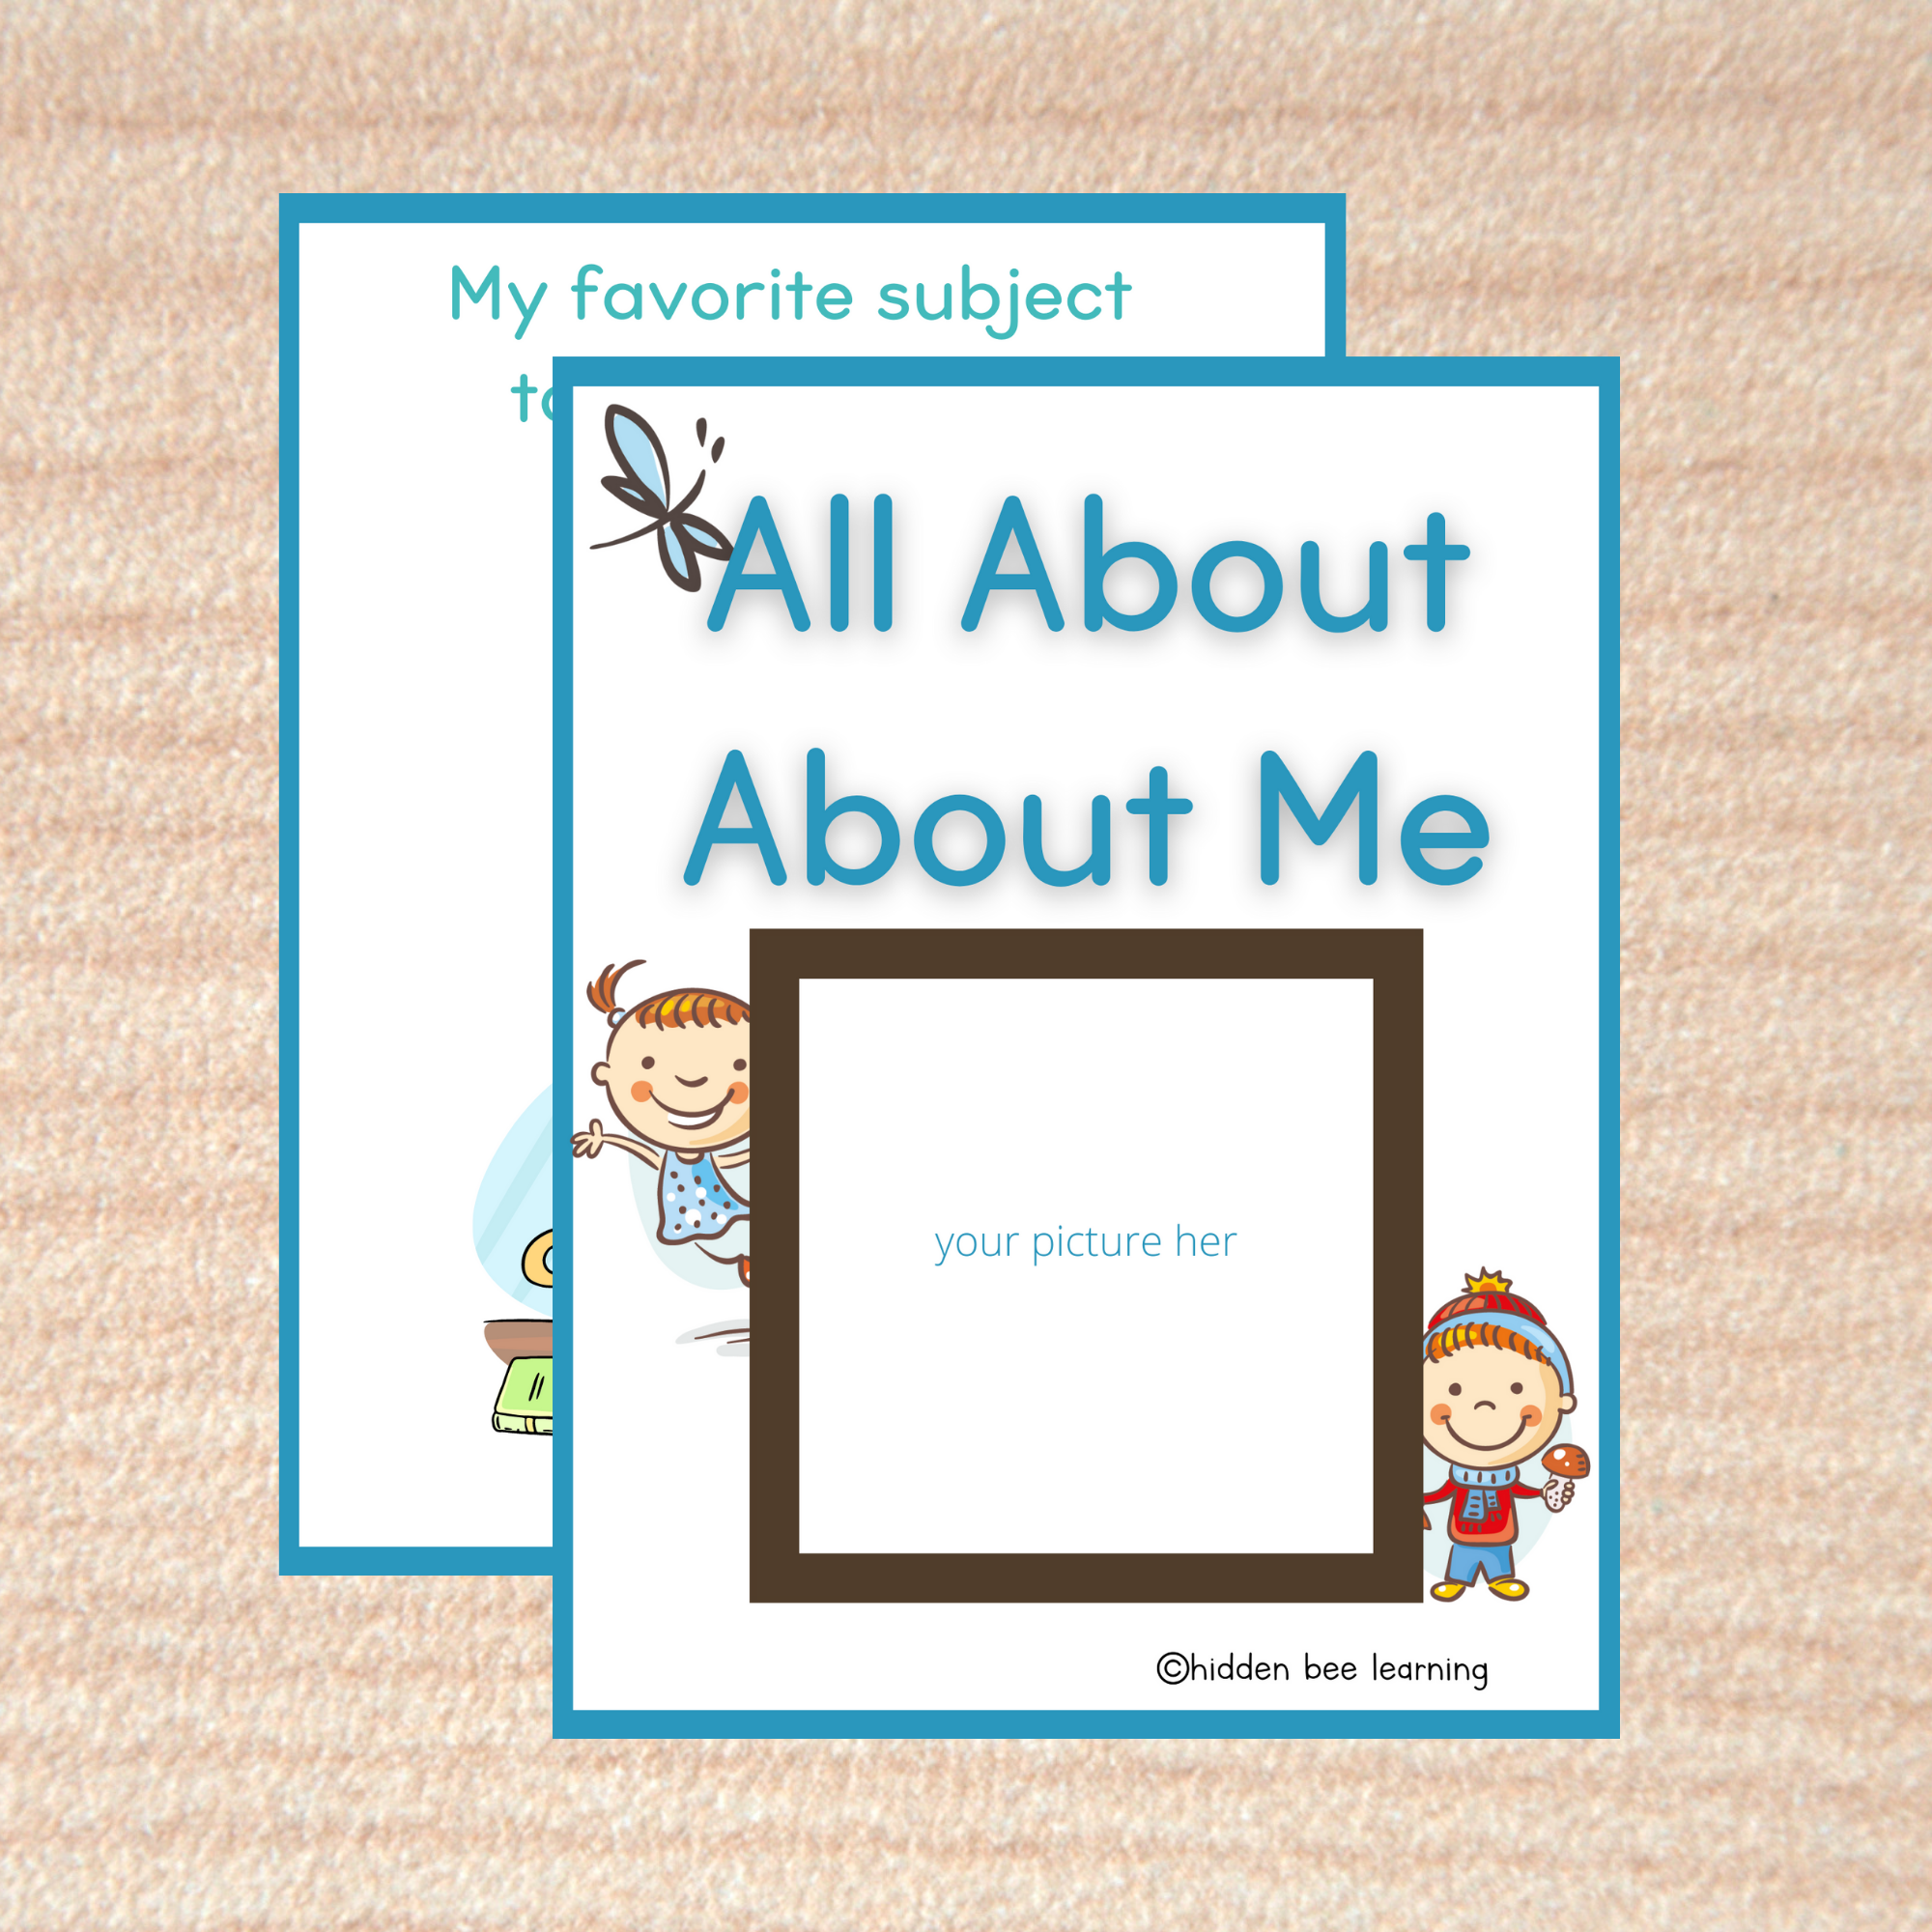 All About Me!'s featured image